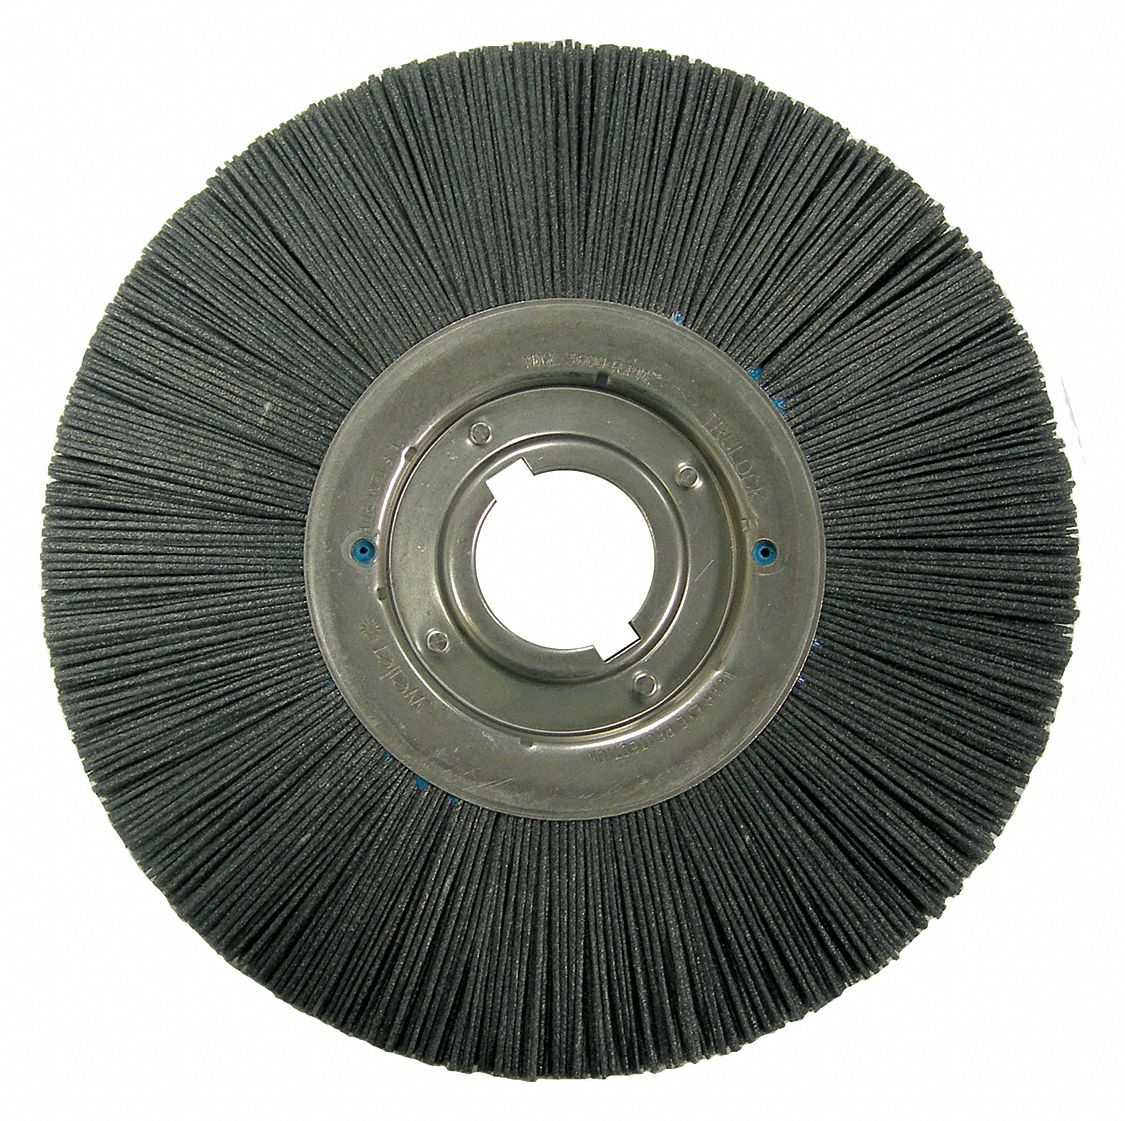 38P502 - Abrasive Nylon Wheels - Only Shipped in Quantities of 2